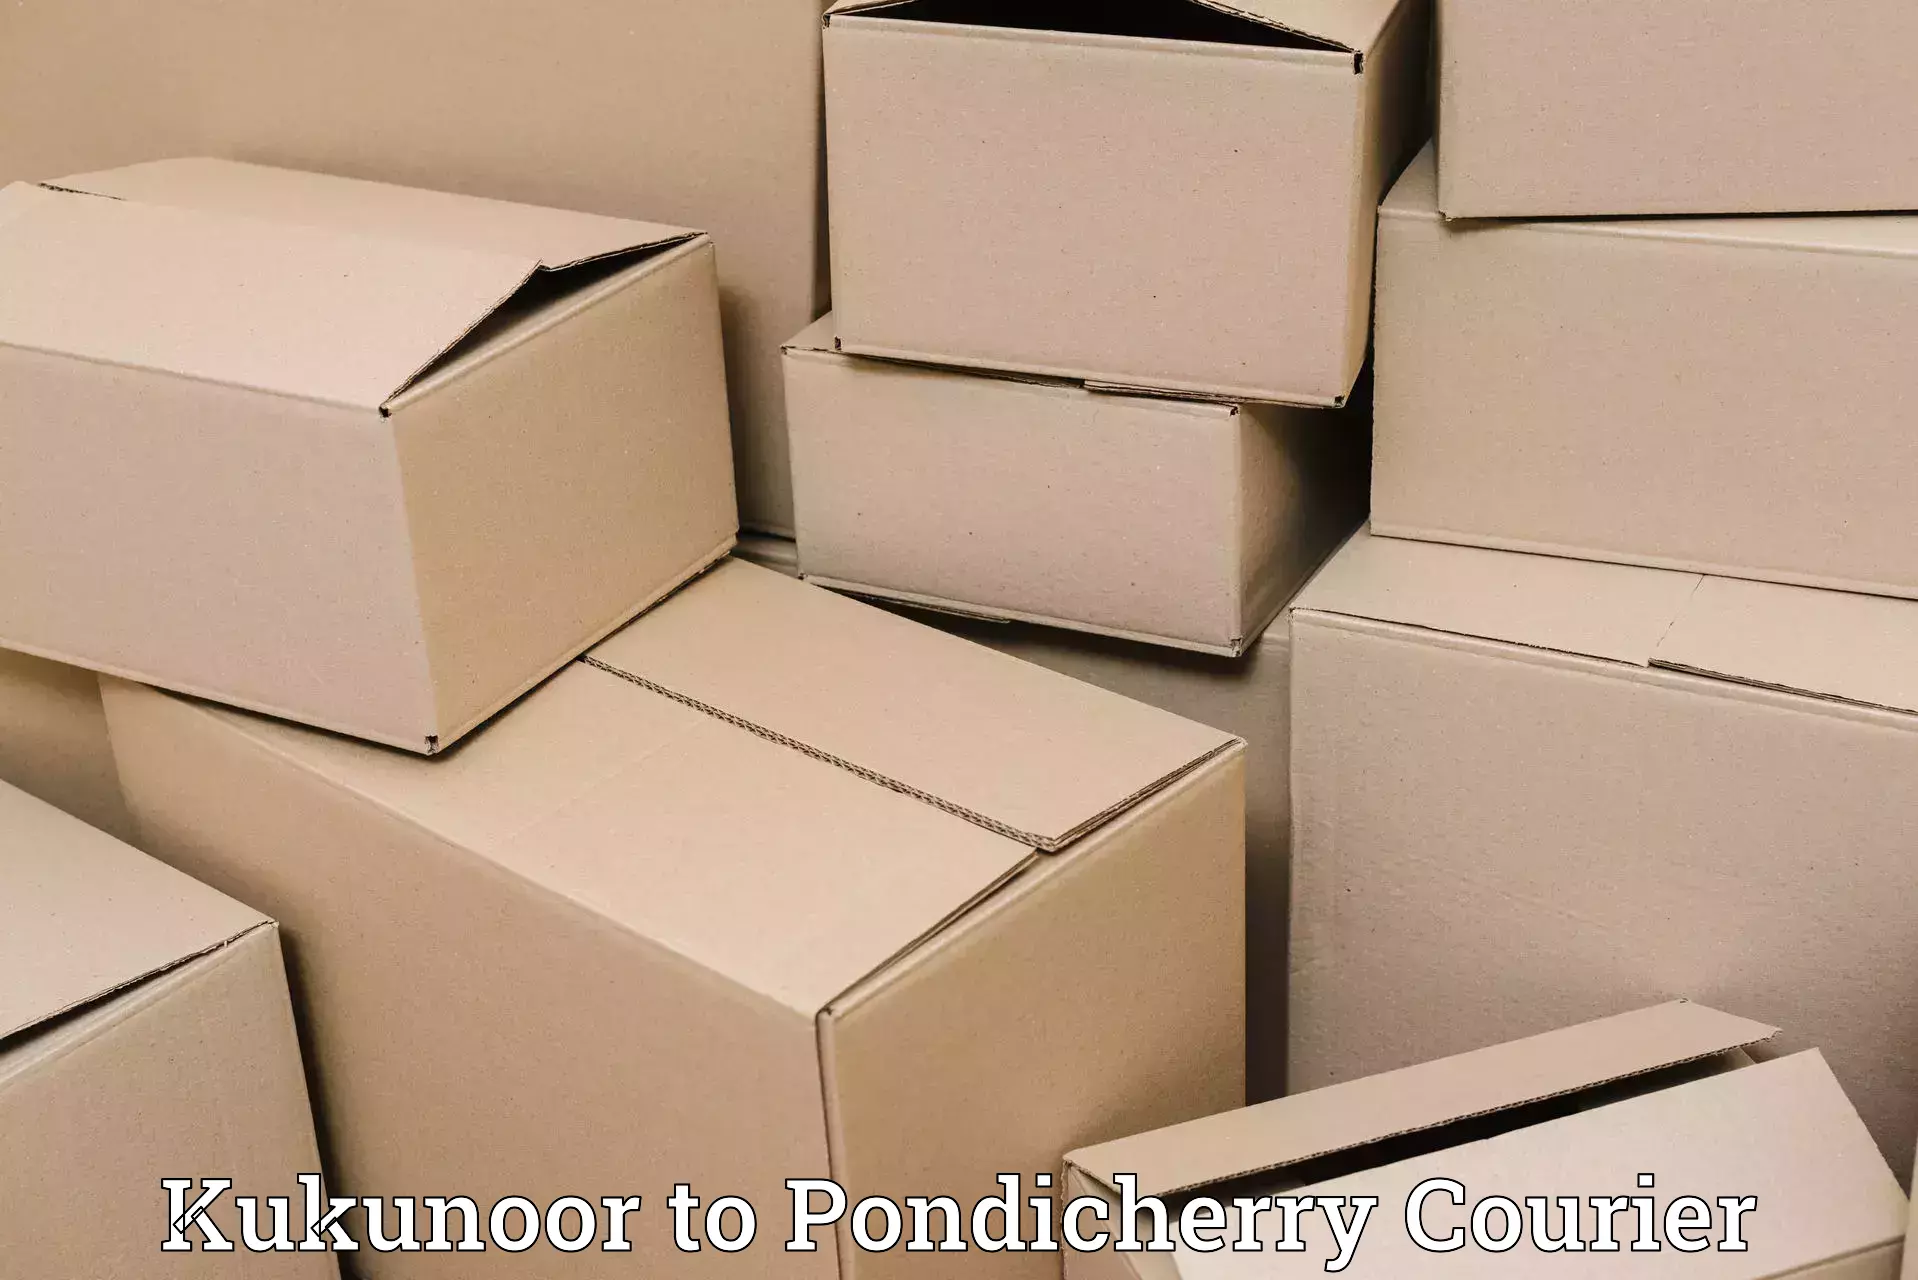 Fast-track shipping solutions Kukunoor to Pondicherry University